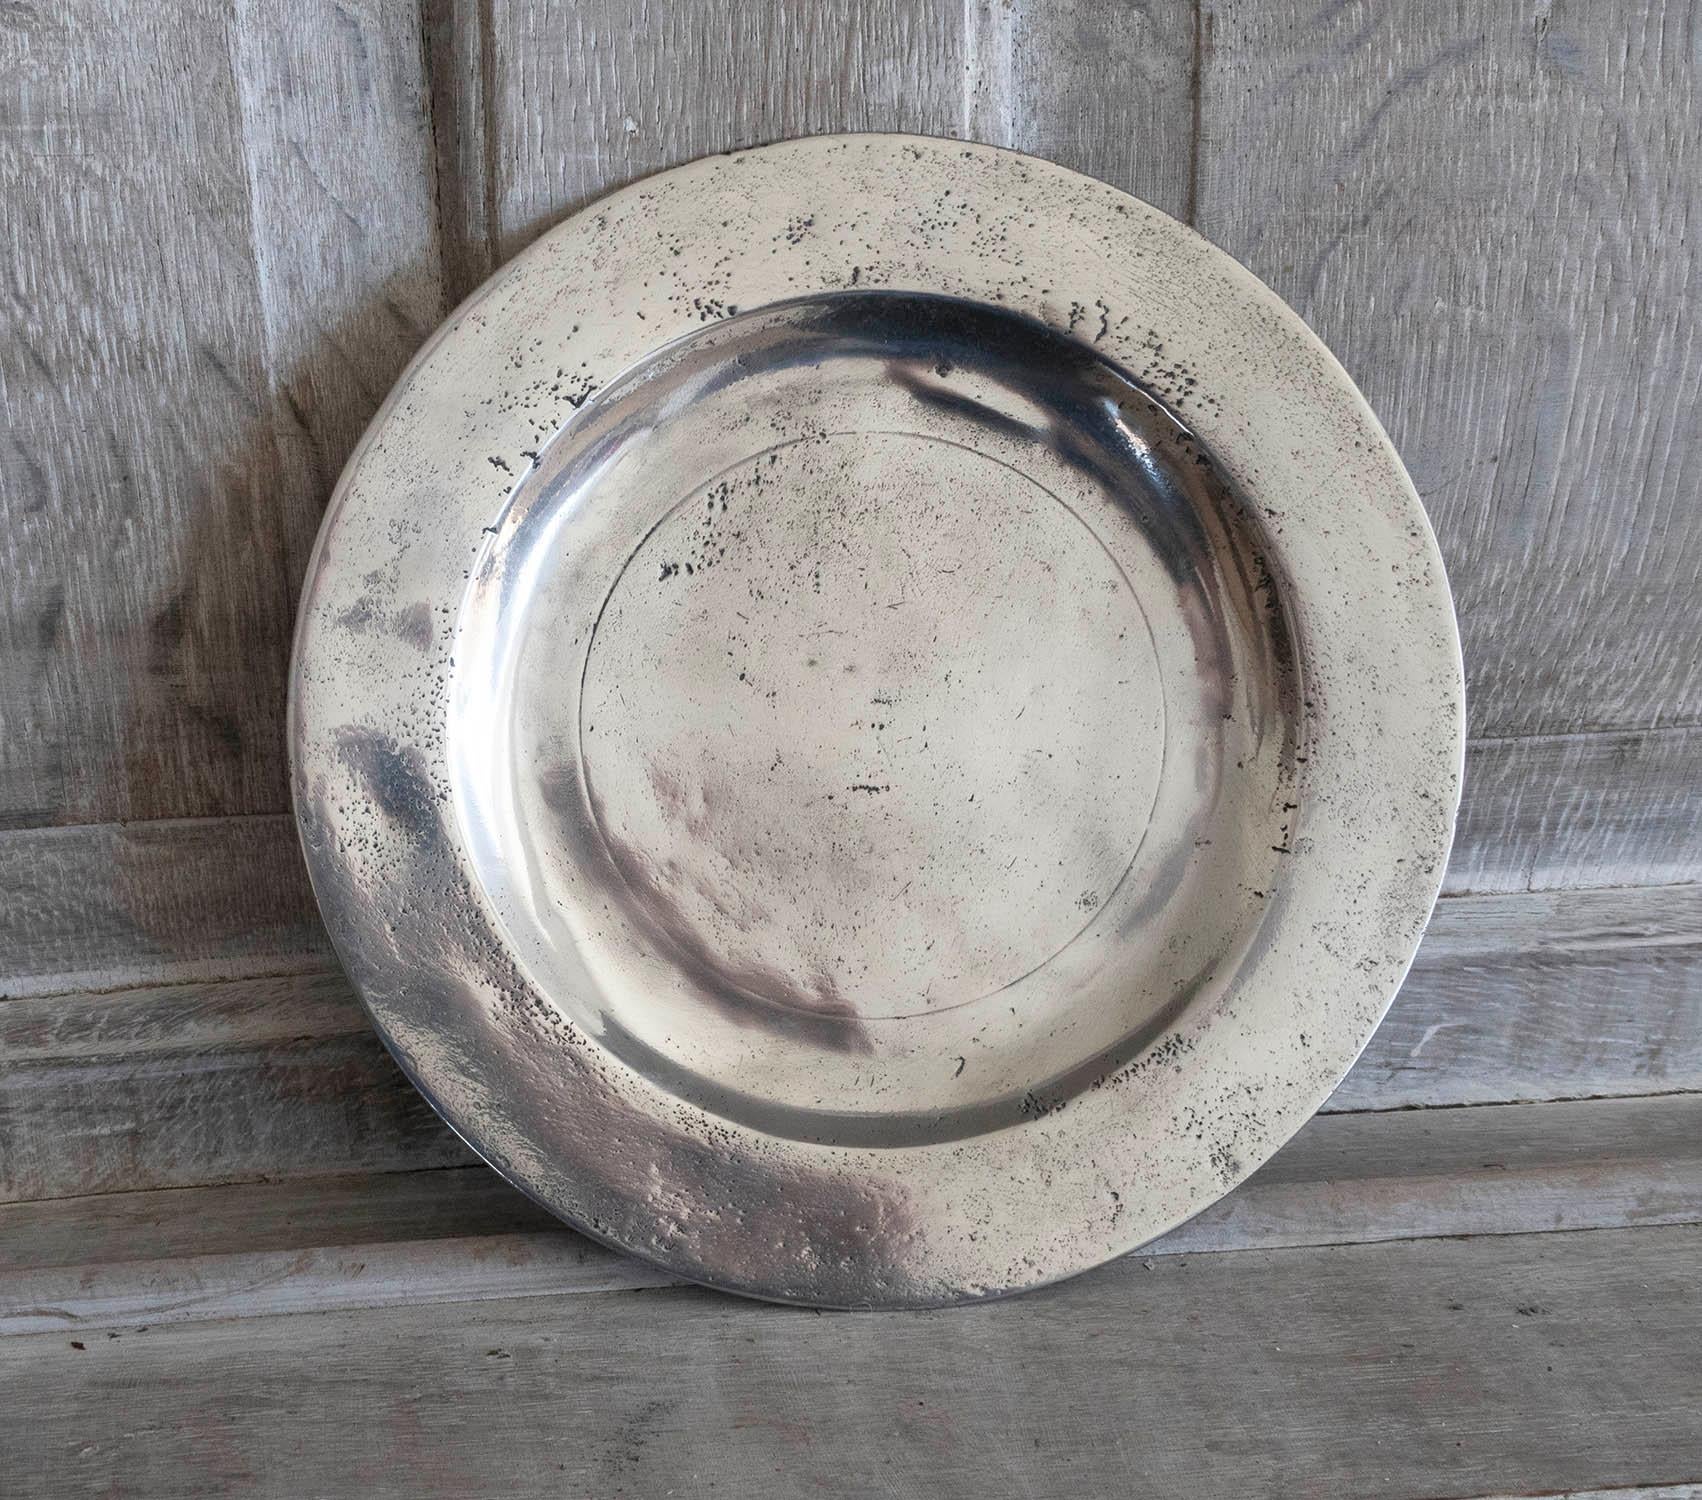 Lovely highly polished pewter plate.

Evidence of a rubbed touchmark on the underside. London maker

The pewter has been polished to its original shine to imitate polished silver. It was known as the Poor Man's Silver.

The great thing about